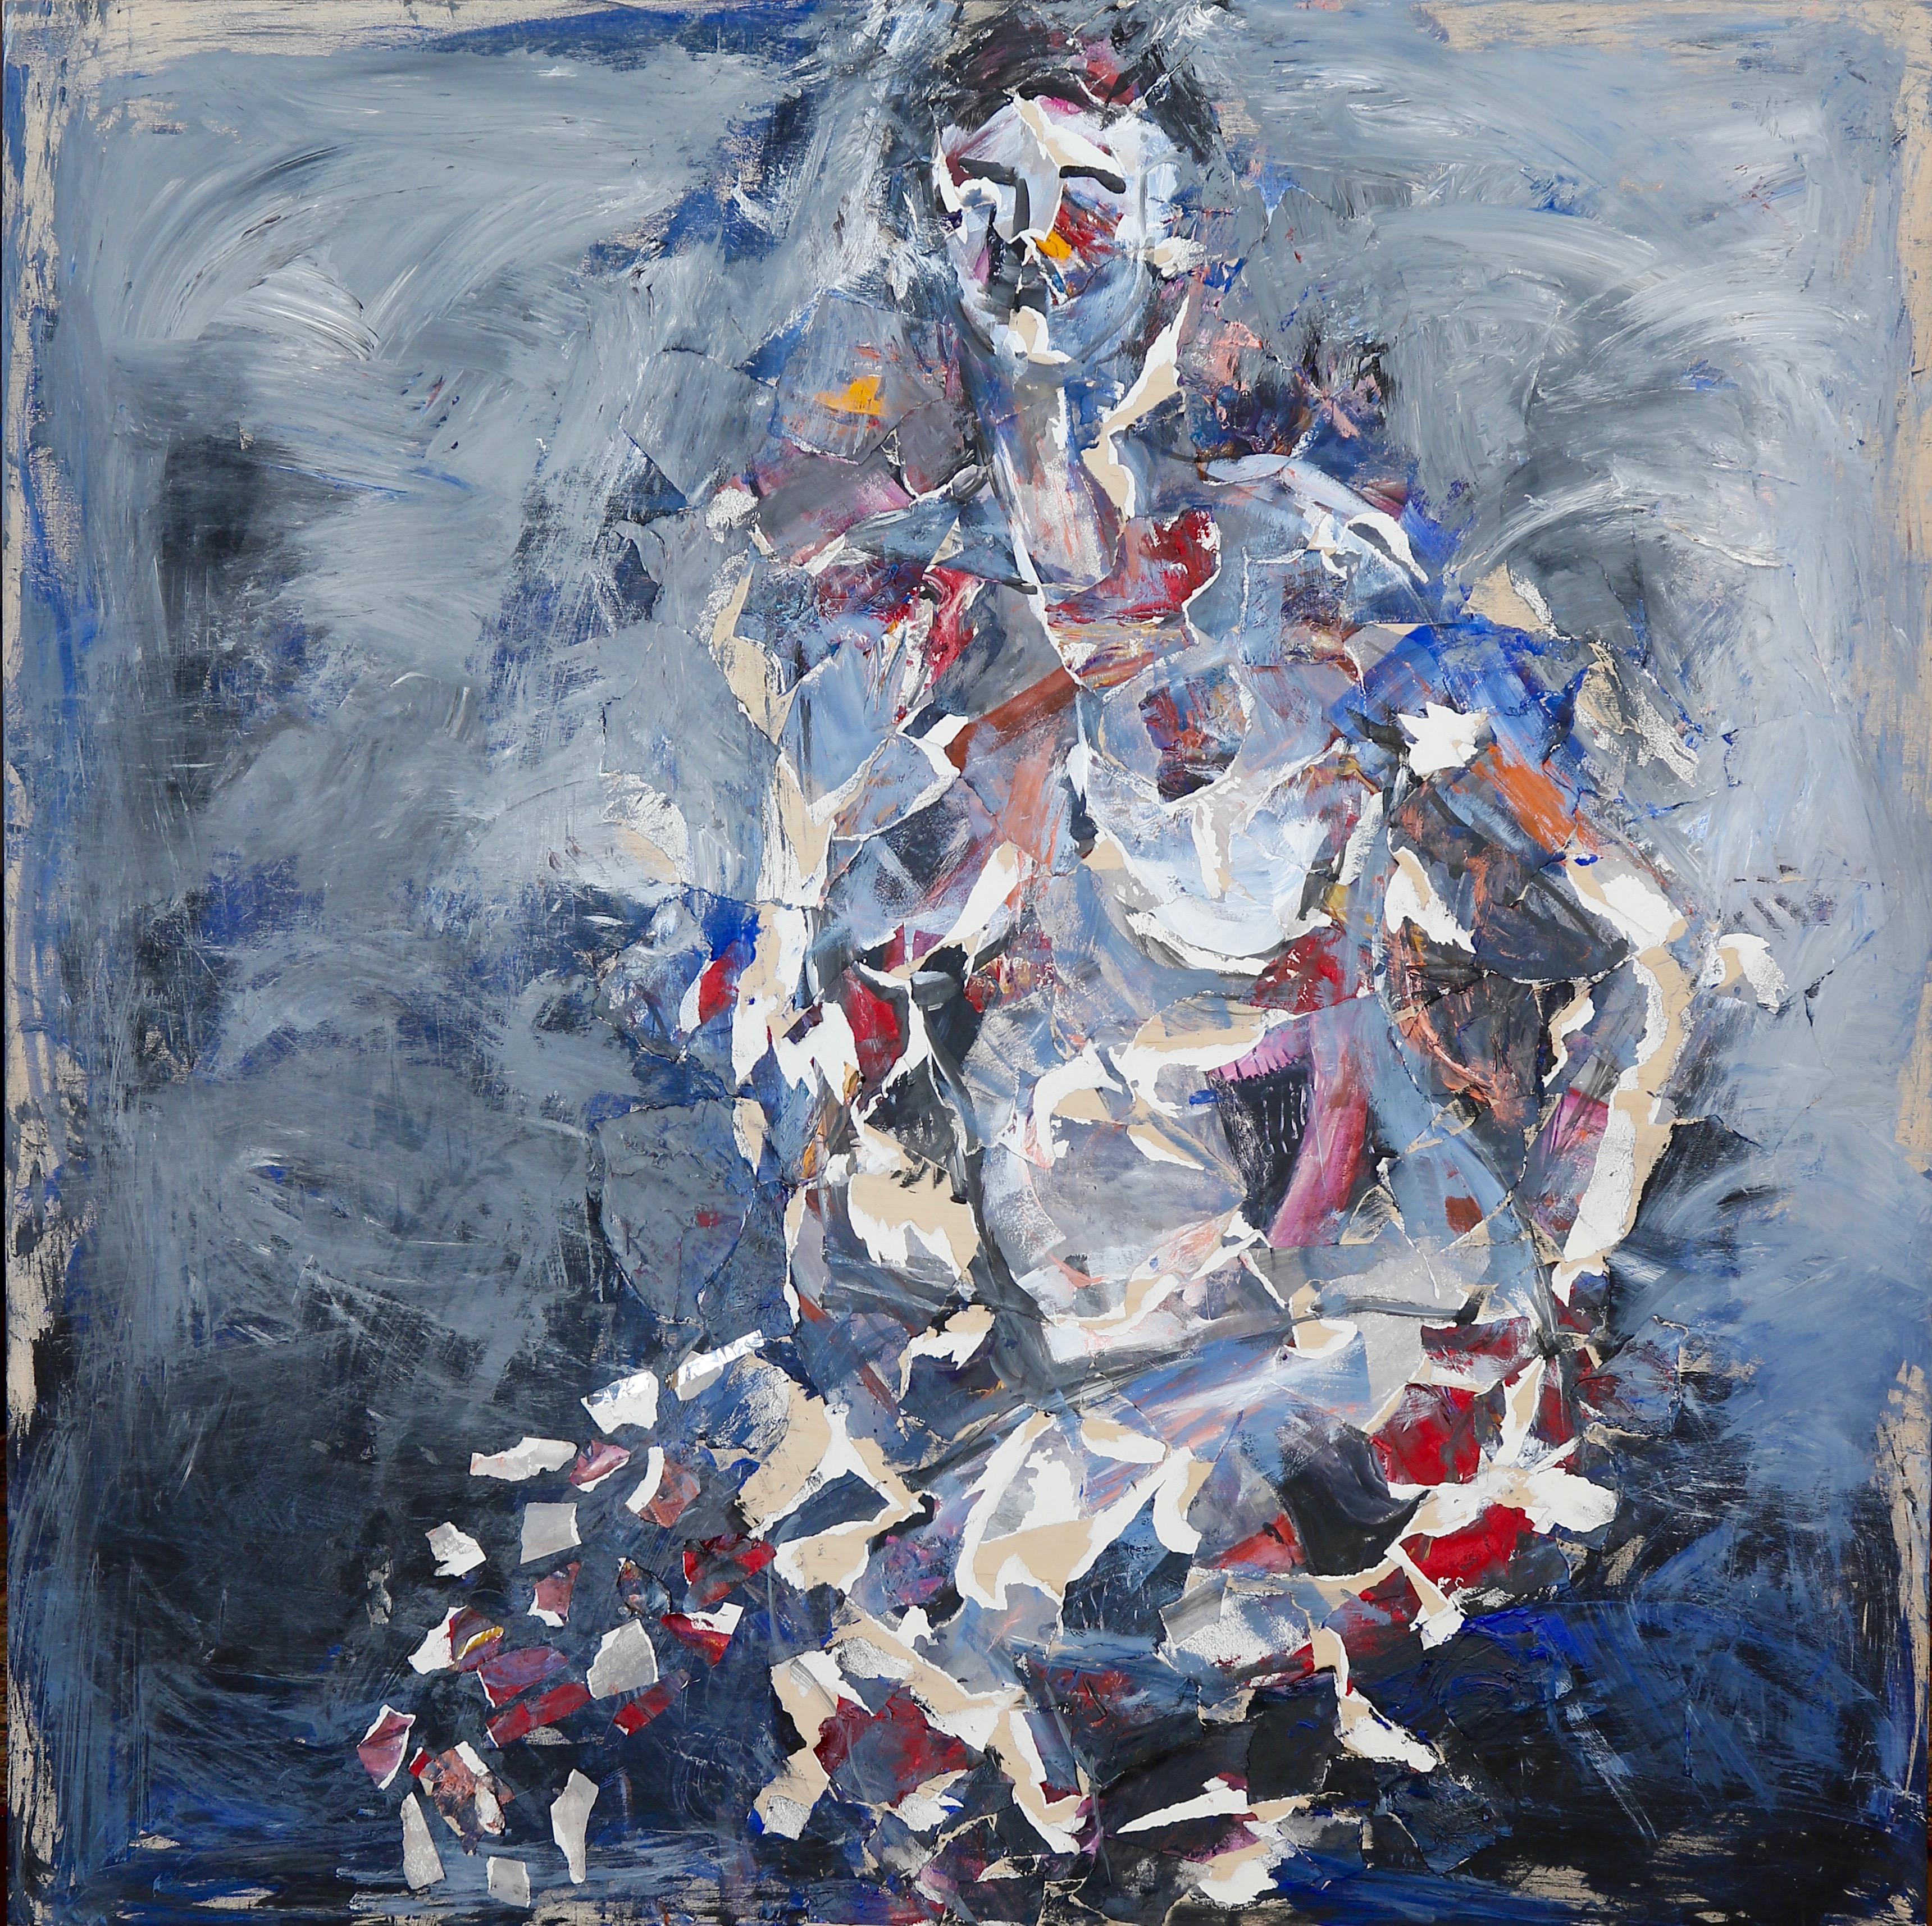 In the painting "Femme 3," the artist delves into techniques reminiscent of early abstraction to depict the figure of a woman. Through the masterful use of blues, whites, and reds, applied with bold and gestural brushstrokes, the artwork pulsates